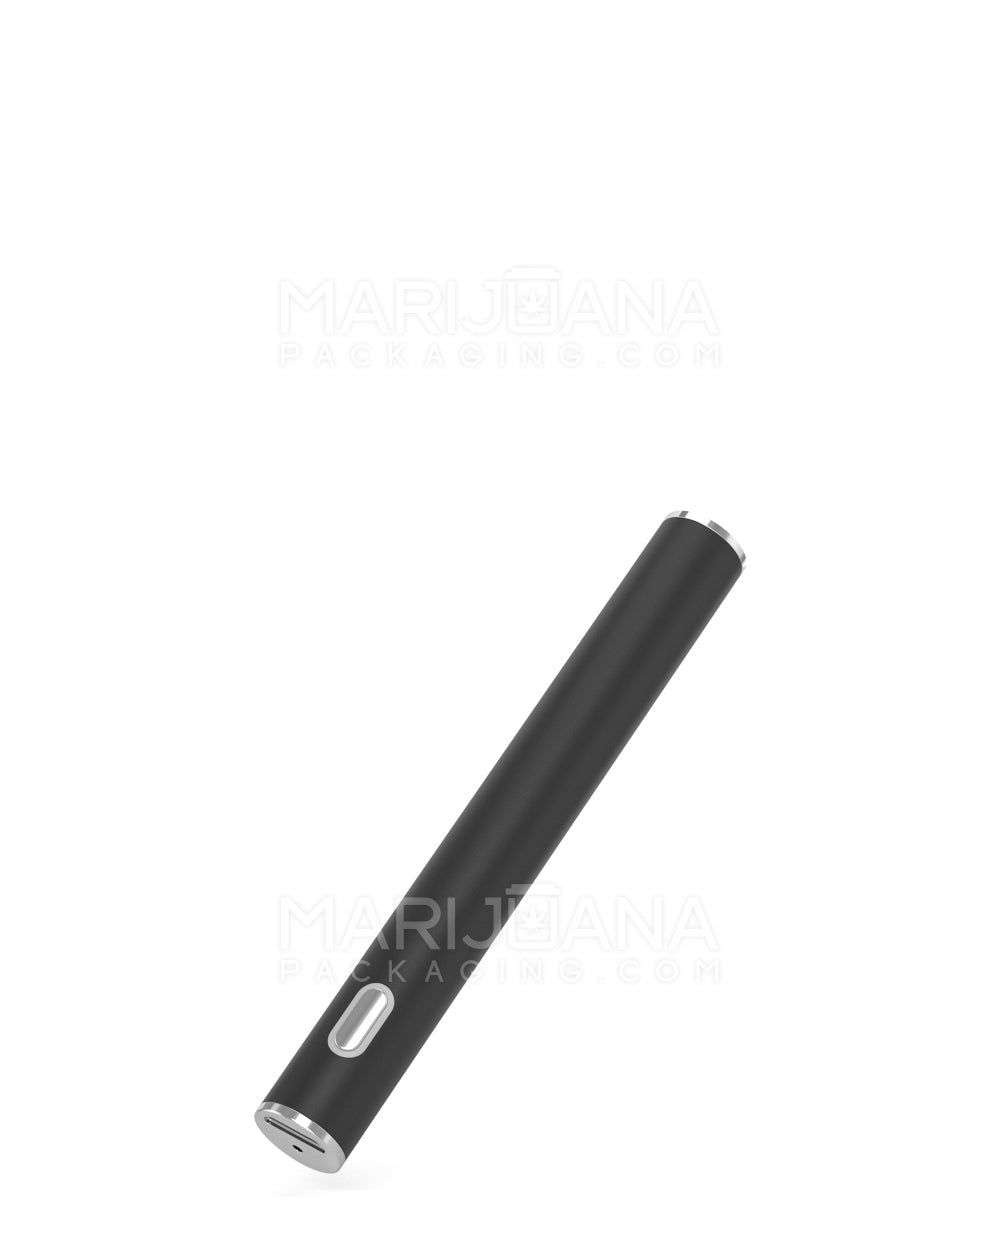 RAE | Instant Draw Activated Vape Battery | 320mAh - Black - 640 Count - 4